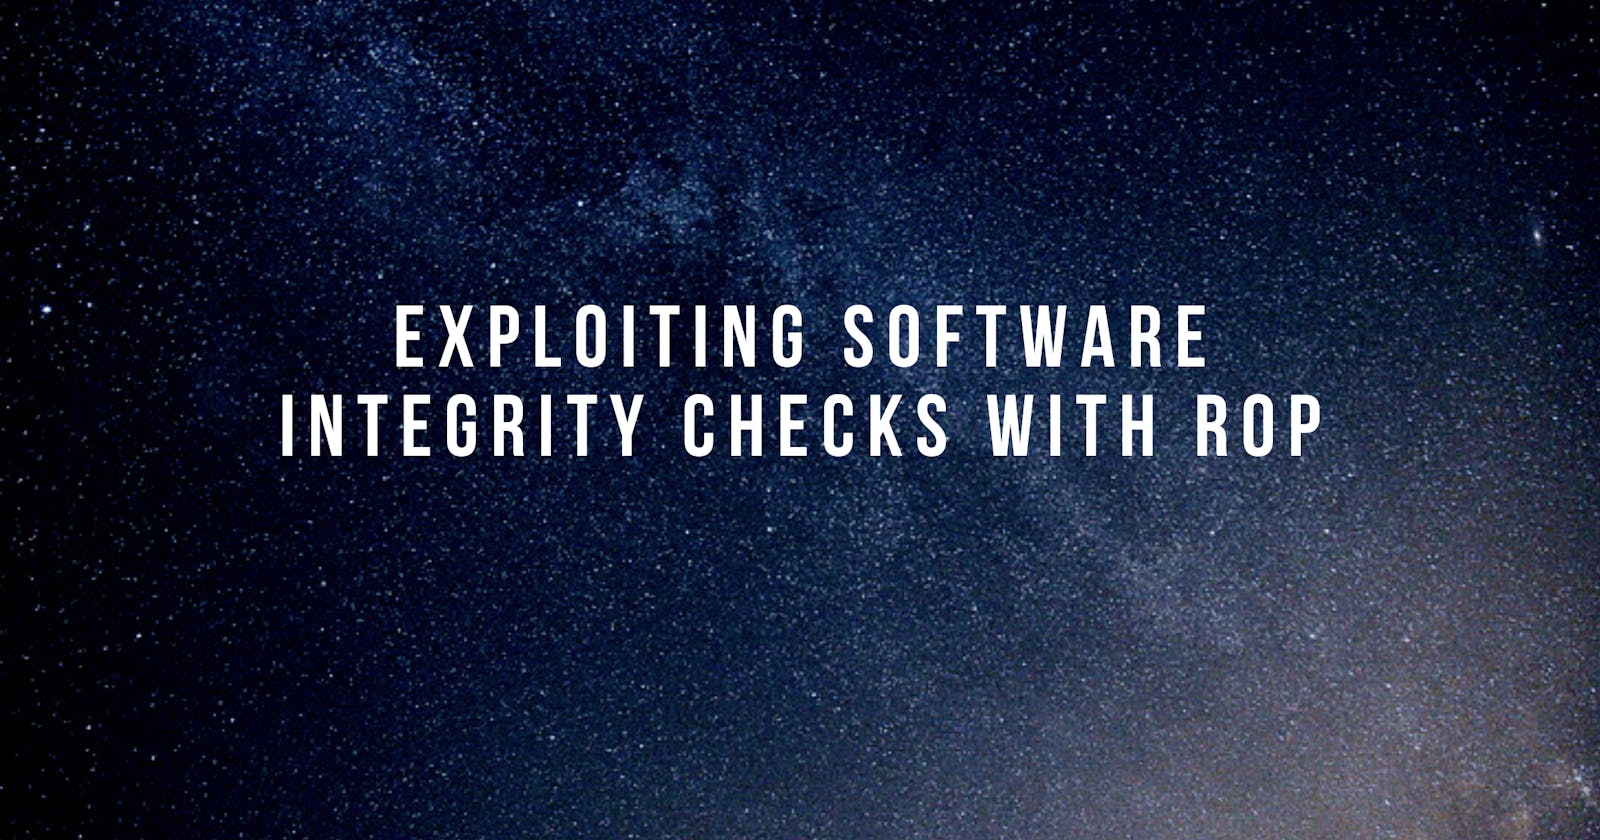 Exploiting Software Integrity Checks with ROP